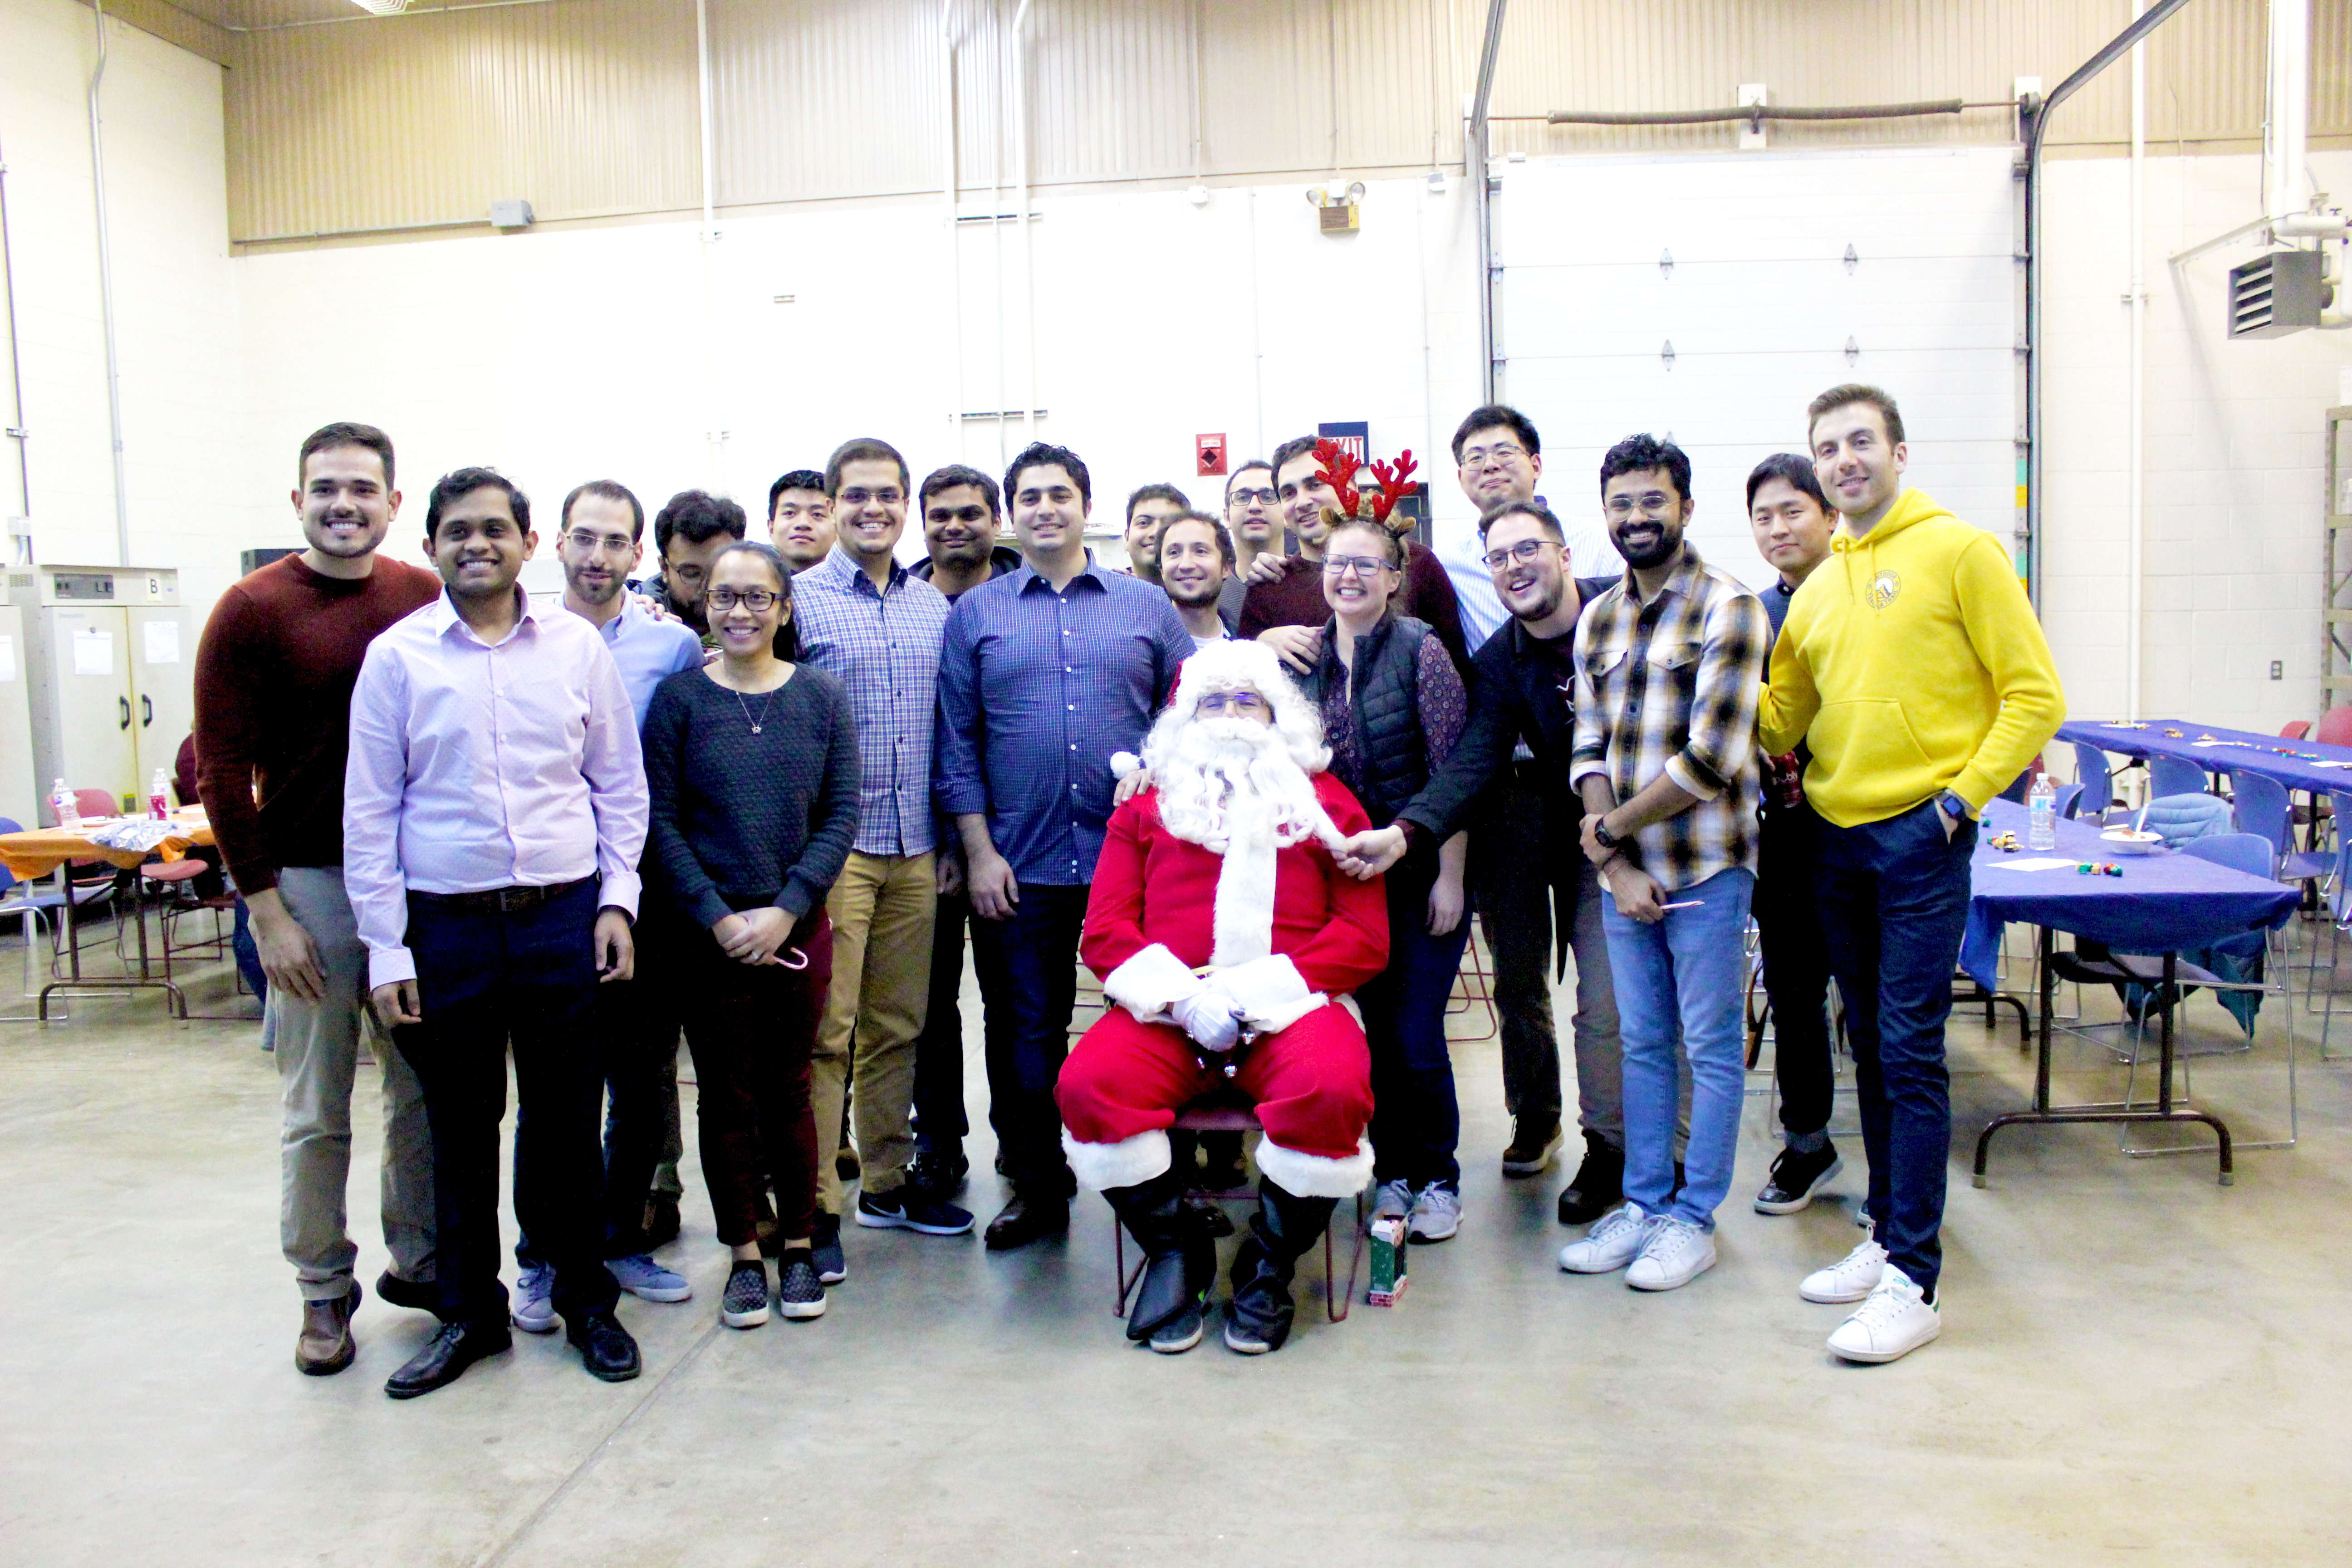 UIUC CEE students strike a pose with Santa Claus during the Dec. 3 Winter Open House at Illinois Center for Transportation in Rantoul, Ill.